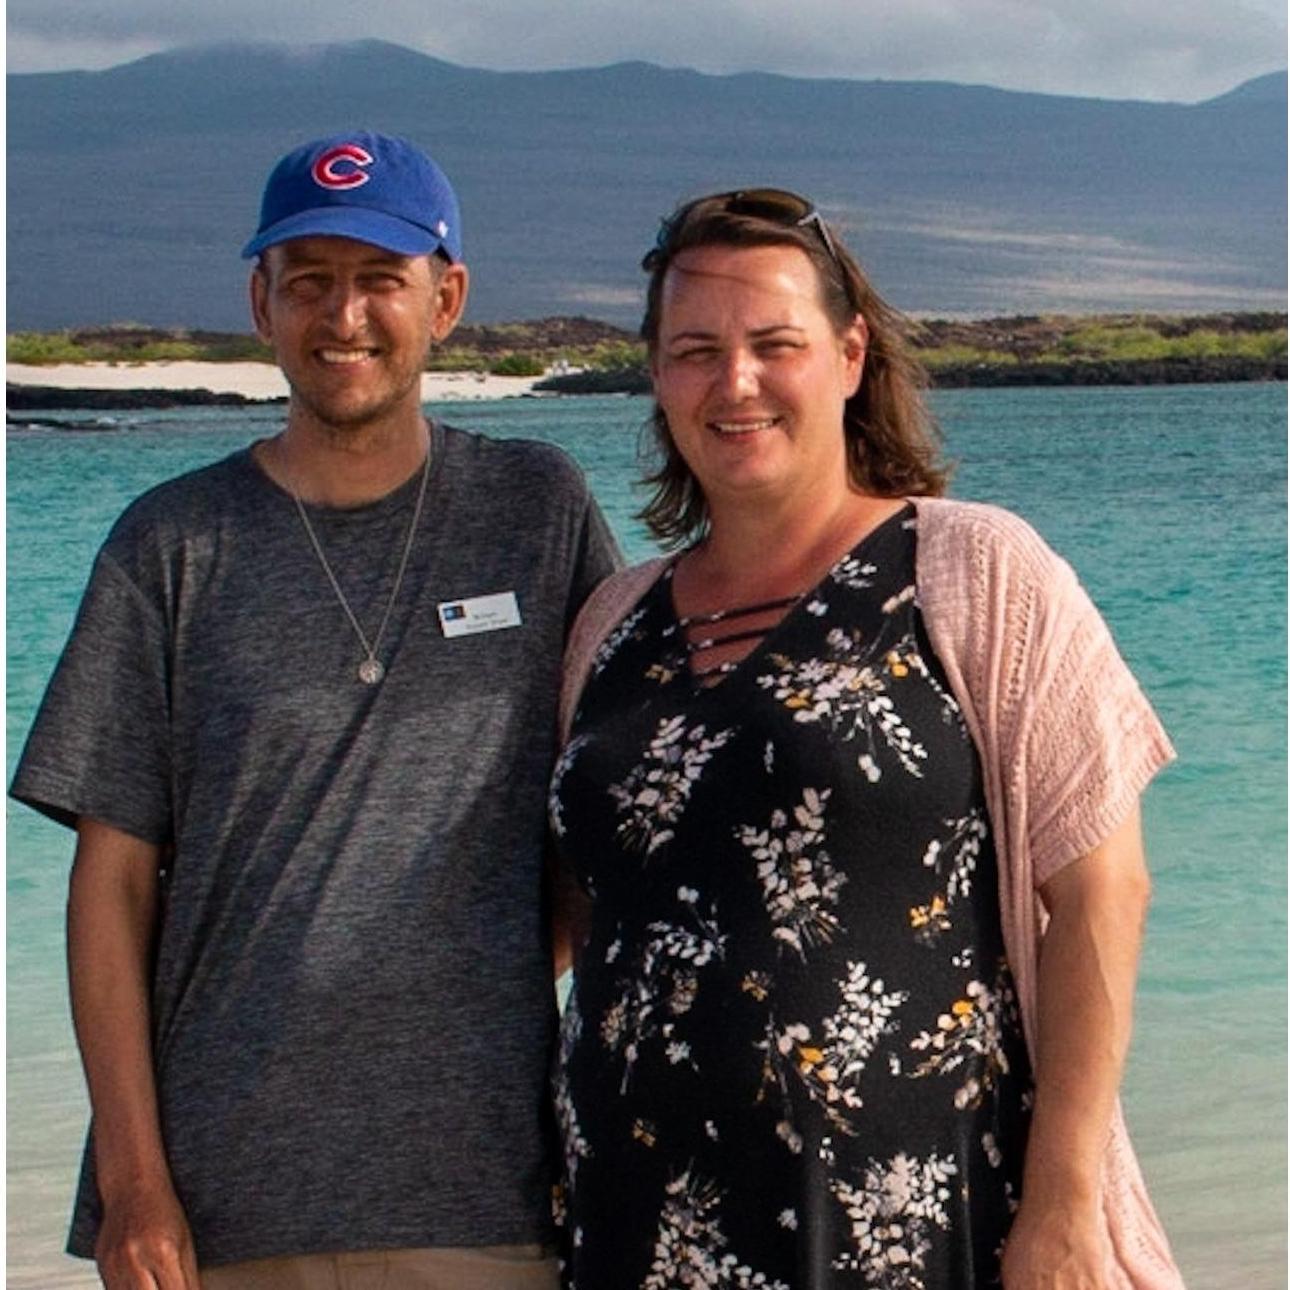 Us in the Galapagos Islands